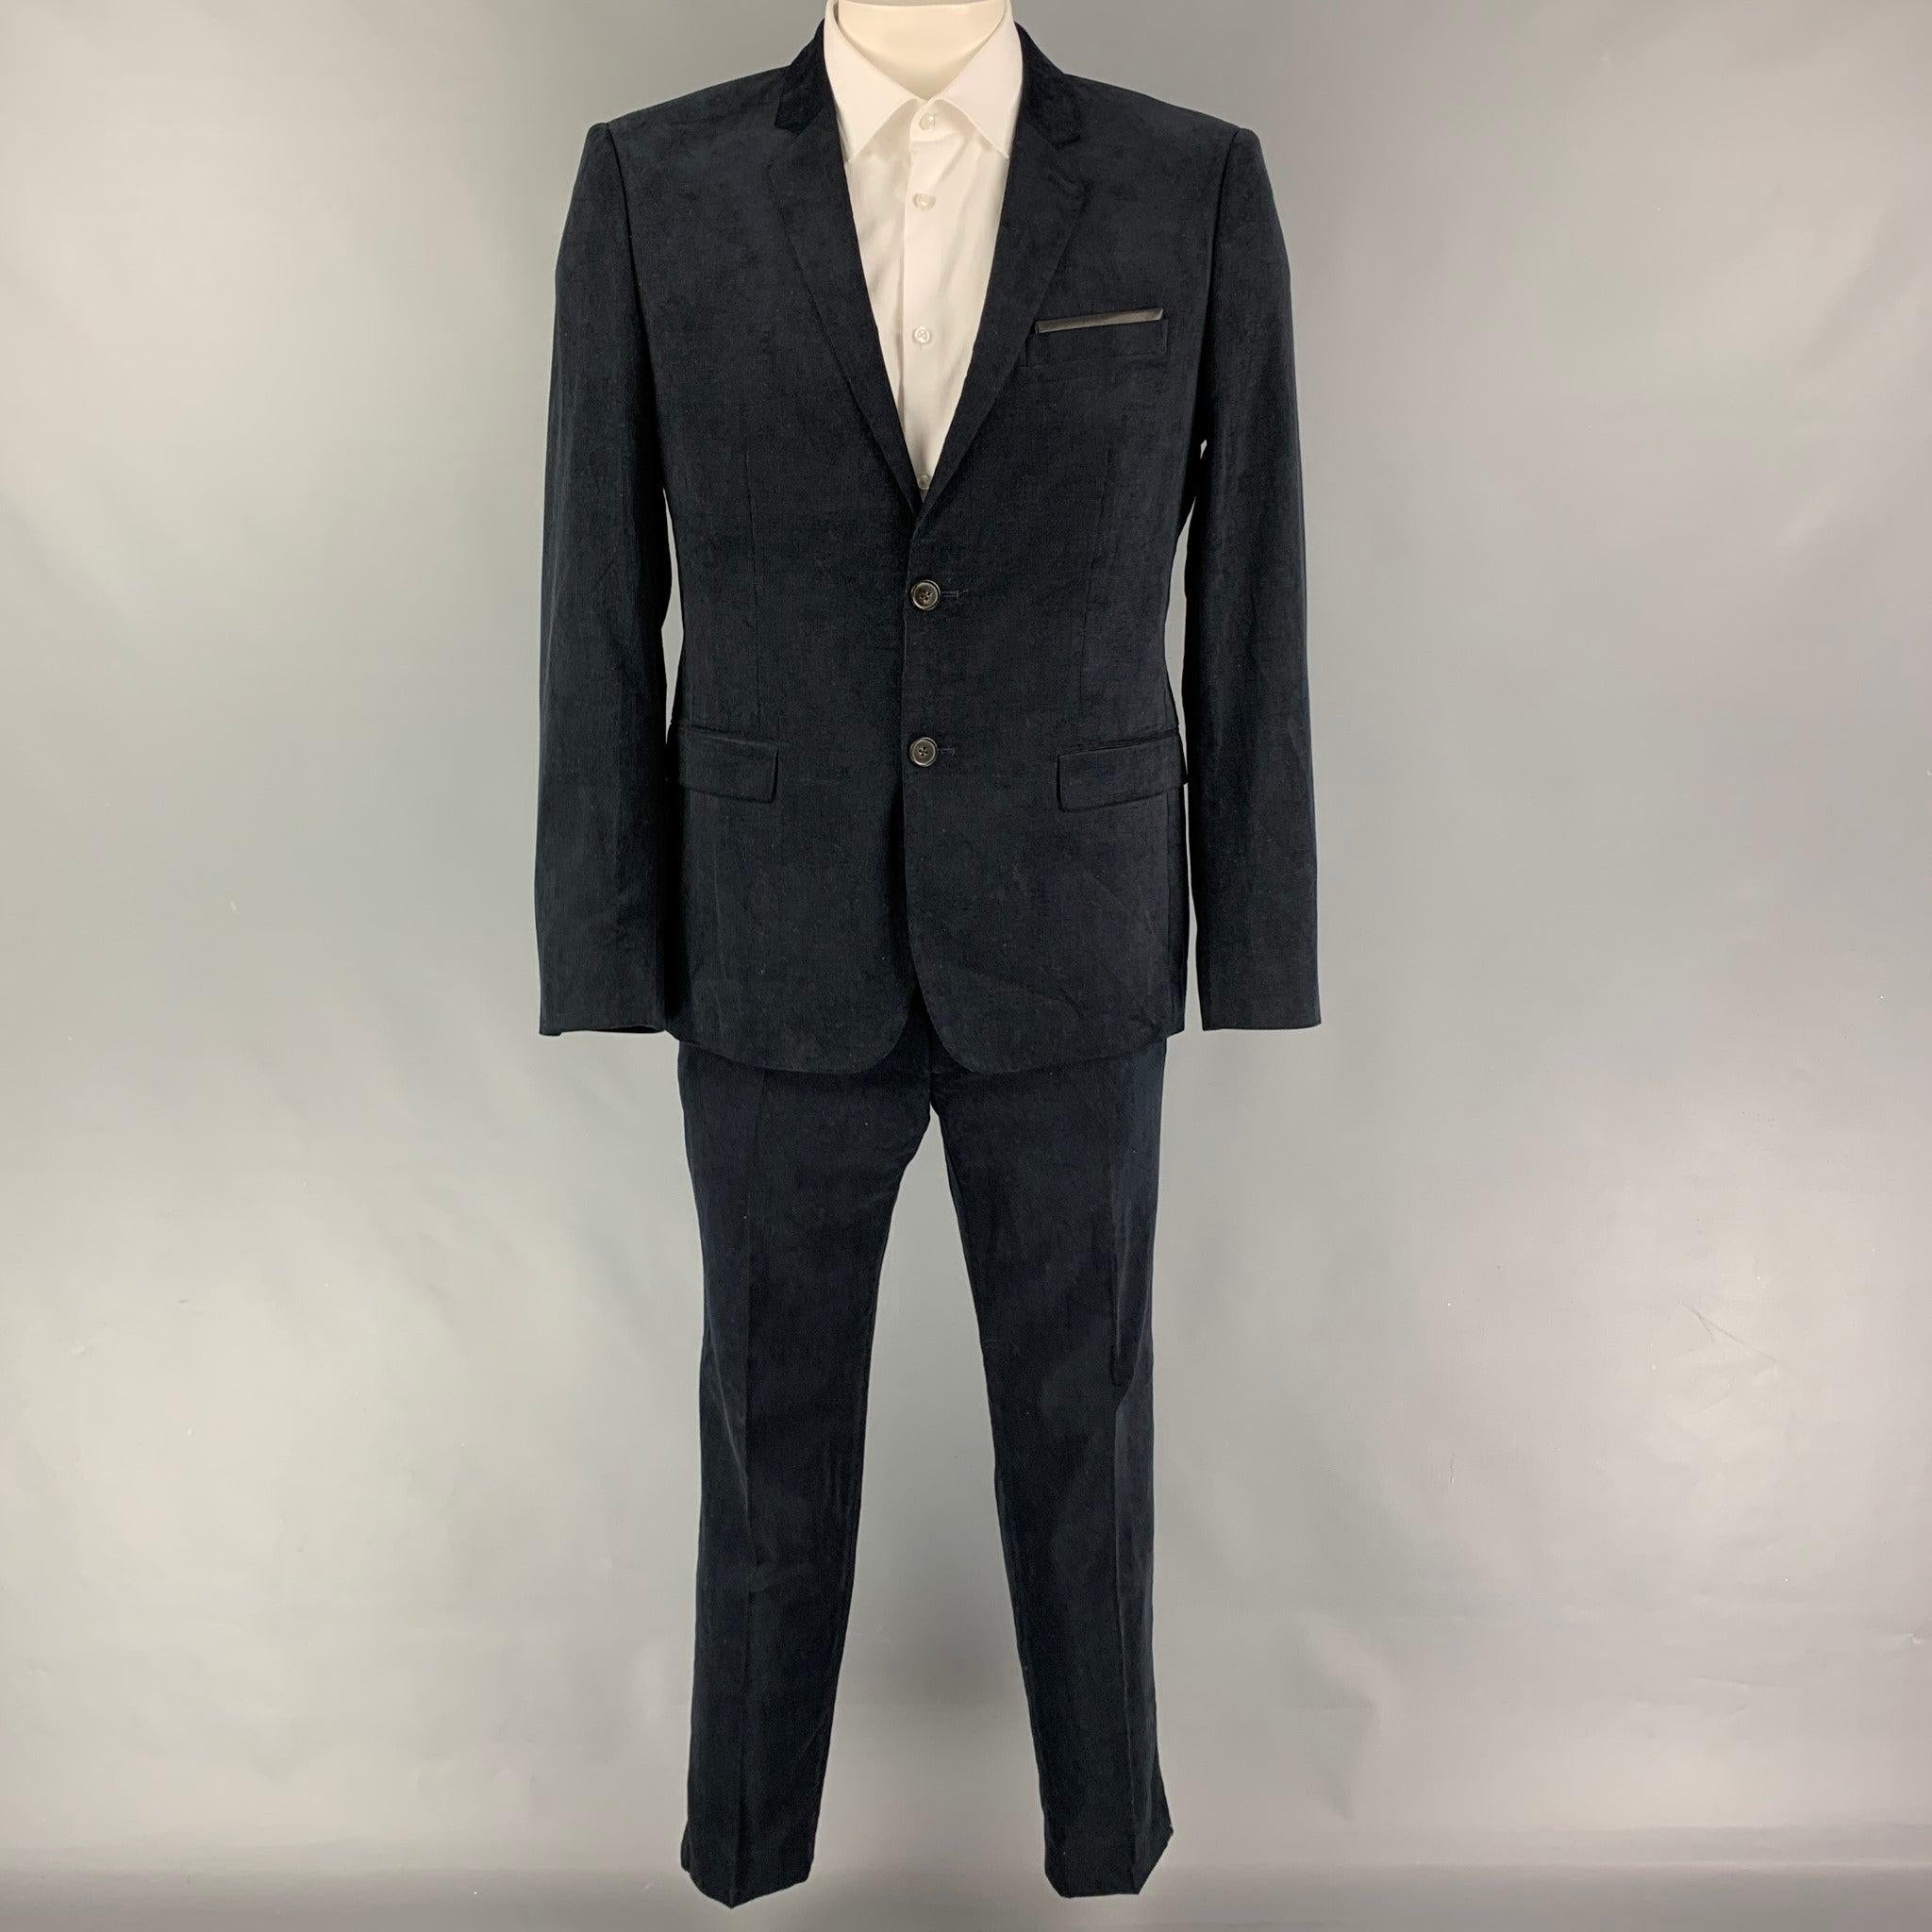 THE KOOPLES
suit comes in a navy corduroy cotton with a full liner and includes a single breasted, double button sport coat with a notch lapel and matching flat front trousers. Includes tags. Very Good Pre-Owned Condition. 

Marked:   52